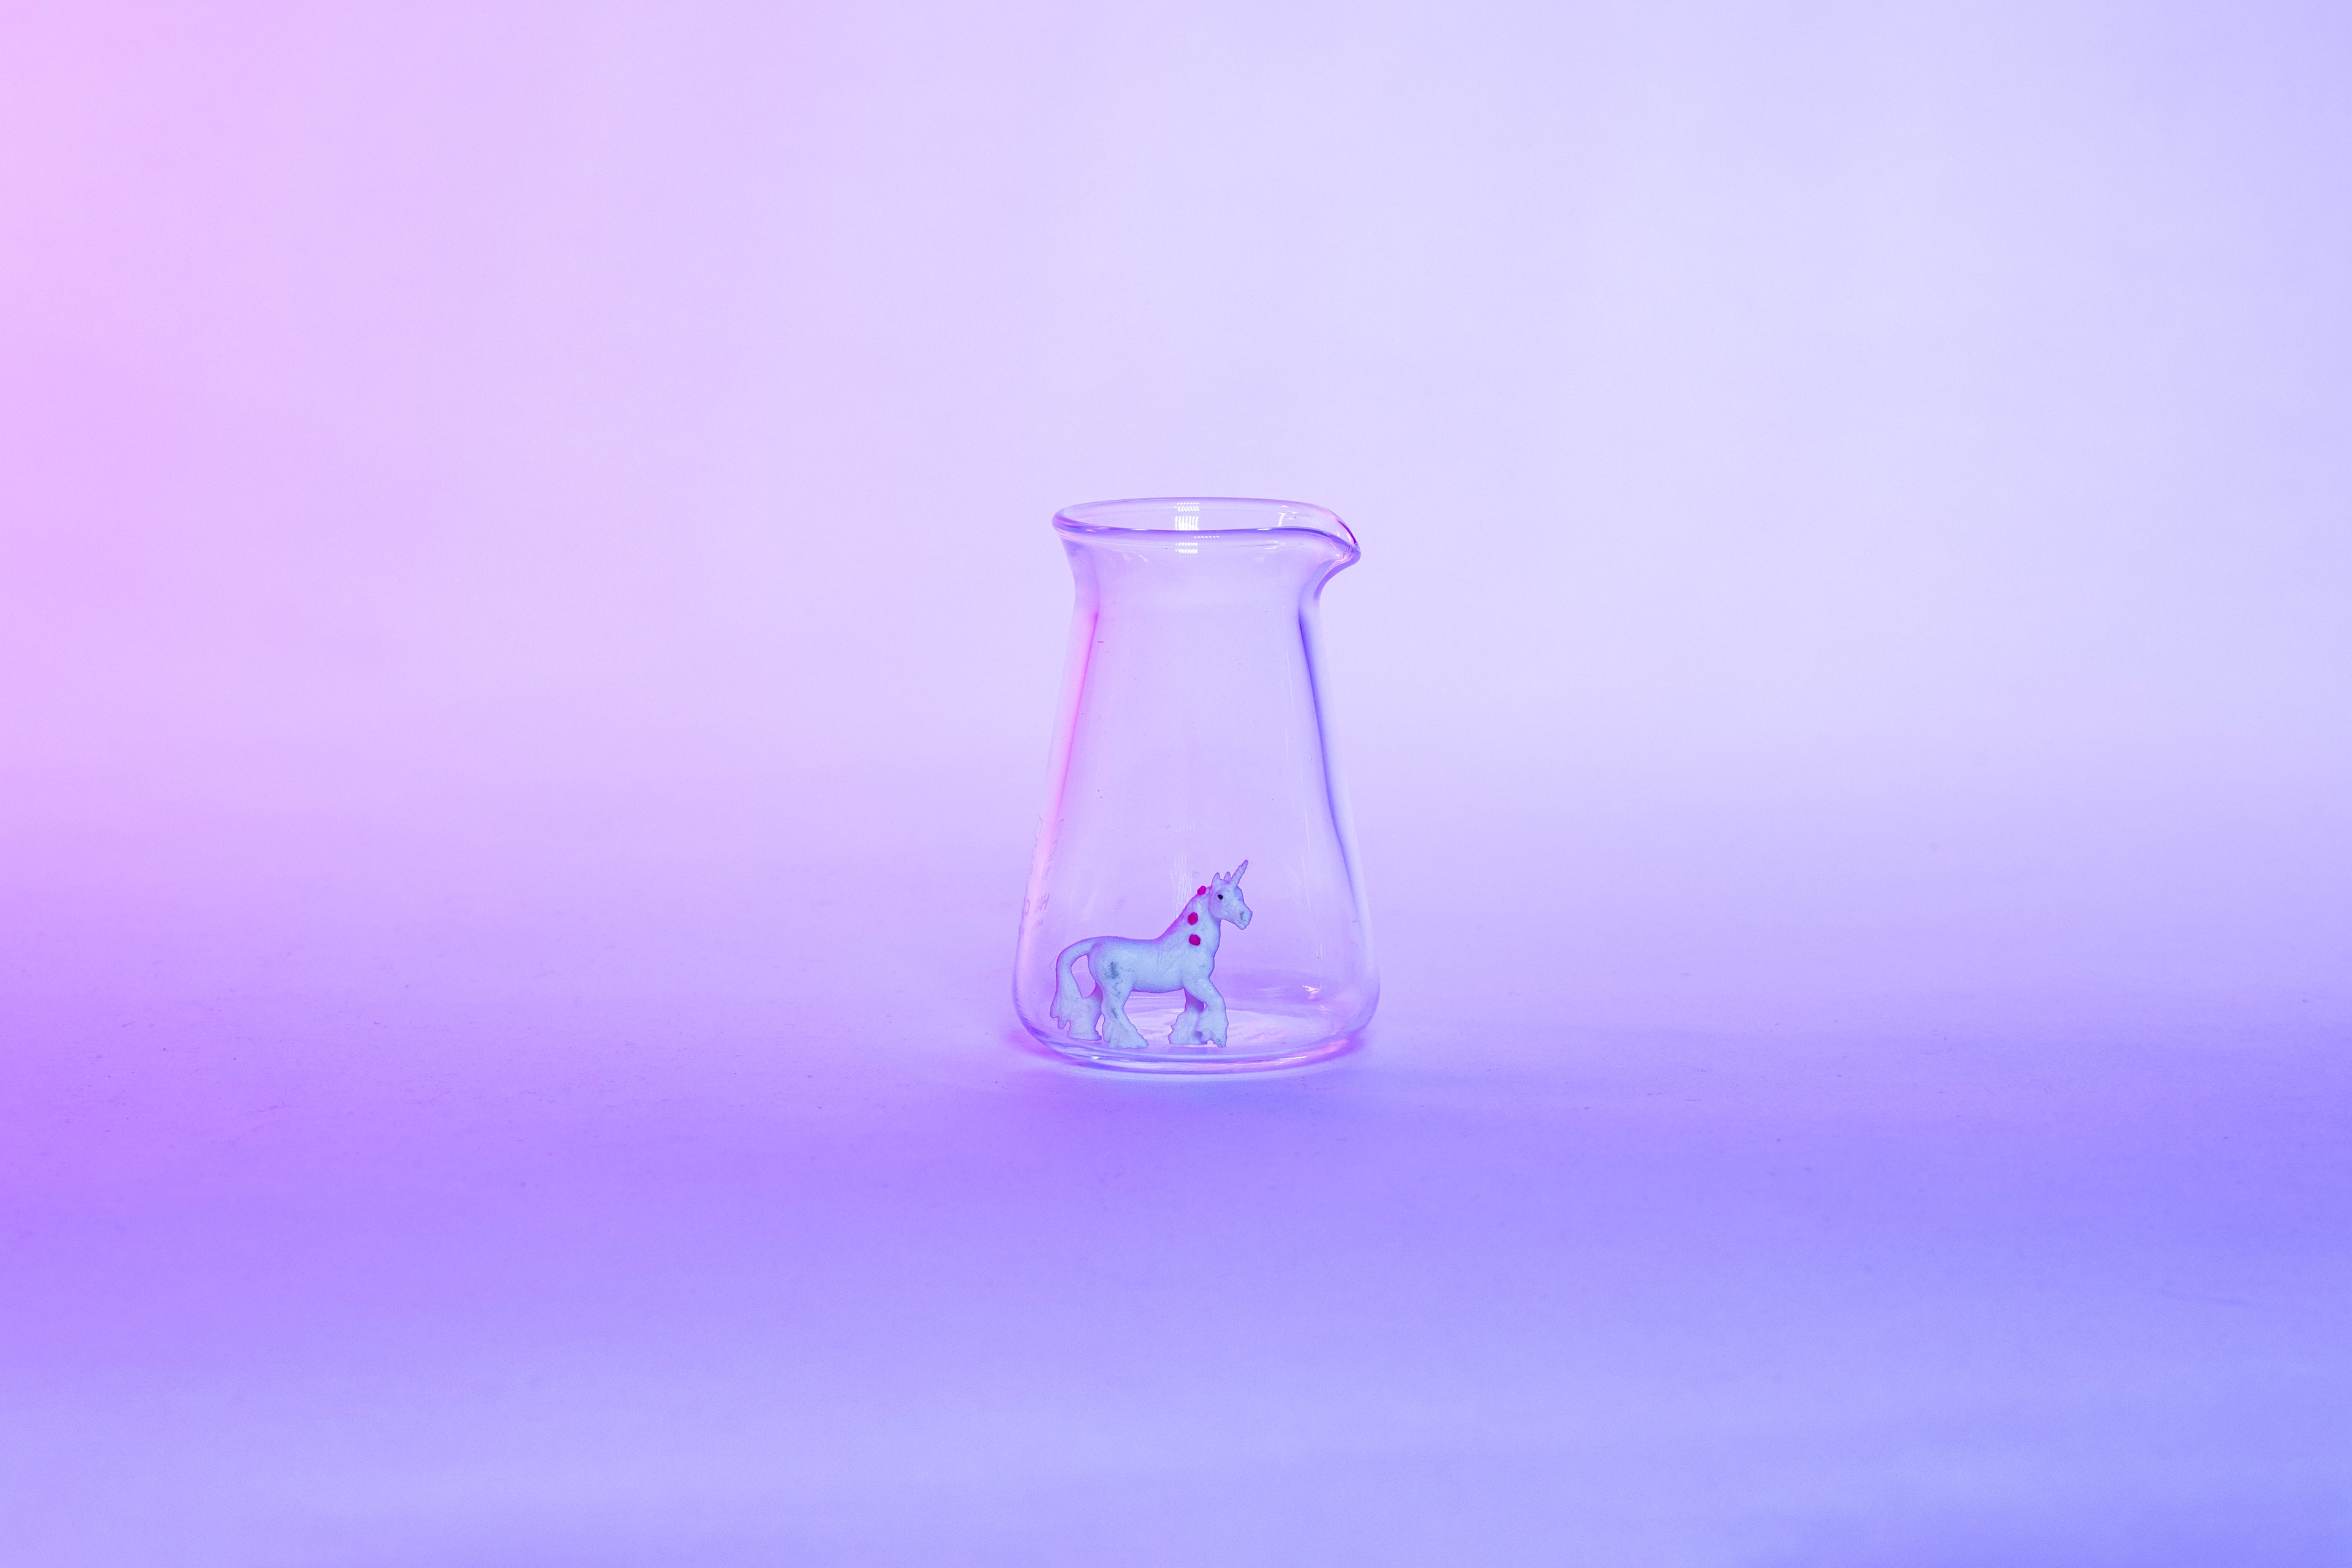 Conical glass flask-shaped coffee pitcher with small white unicorn toy inside and set against a light pink and purple background.